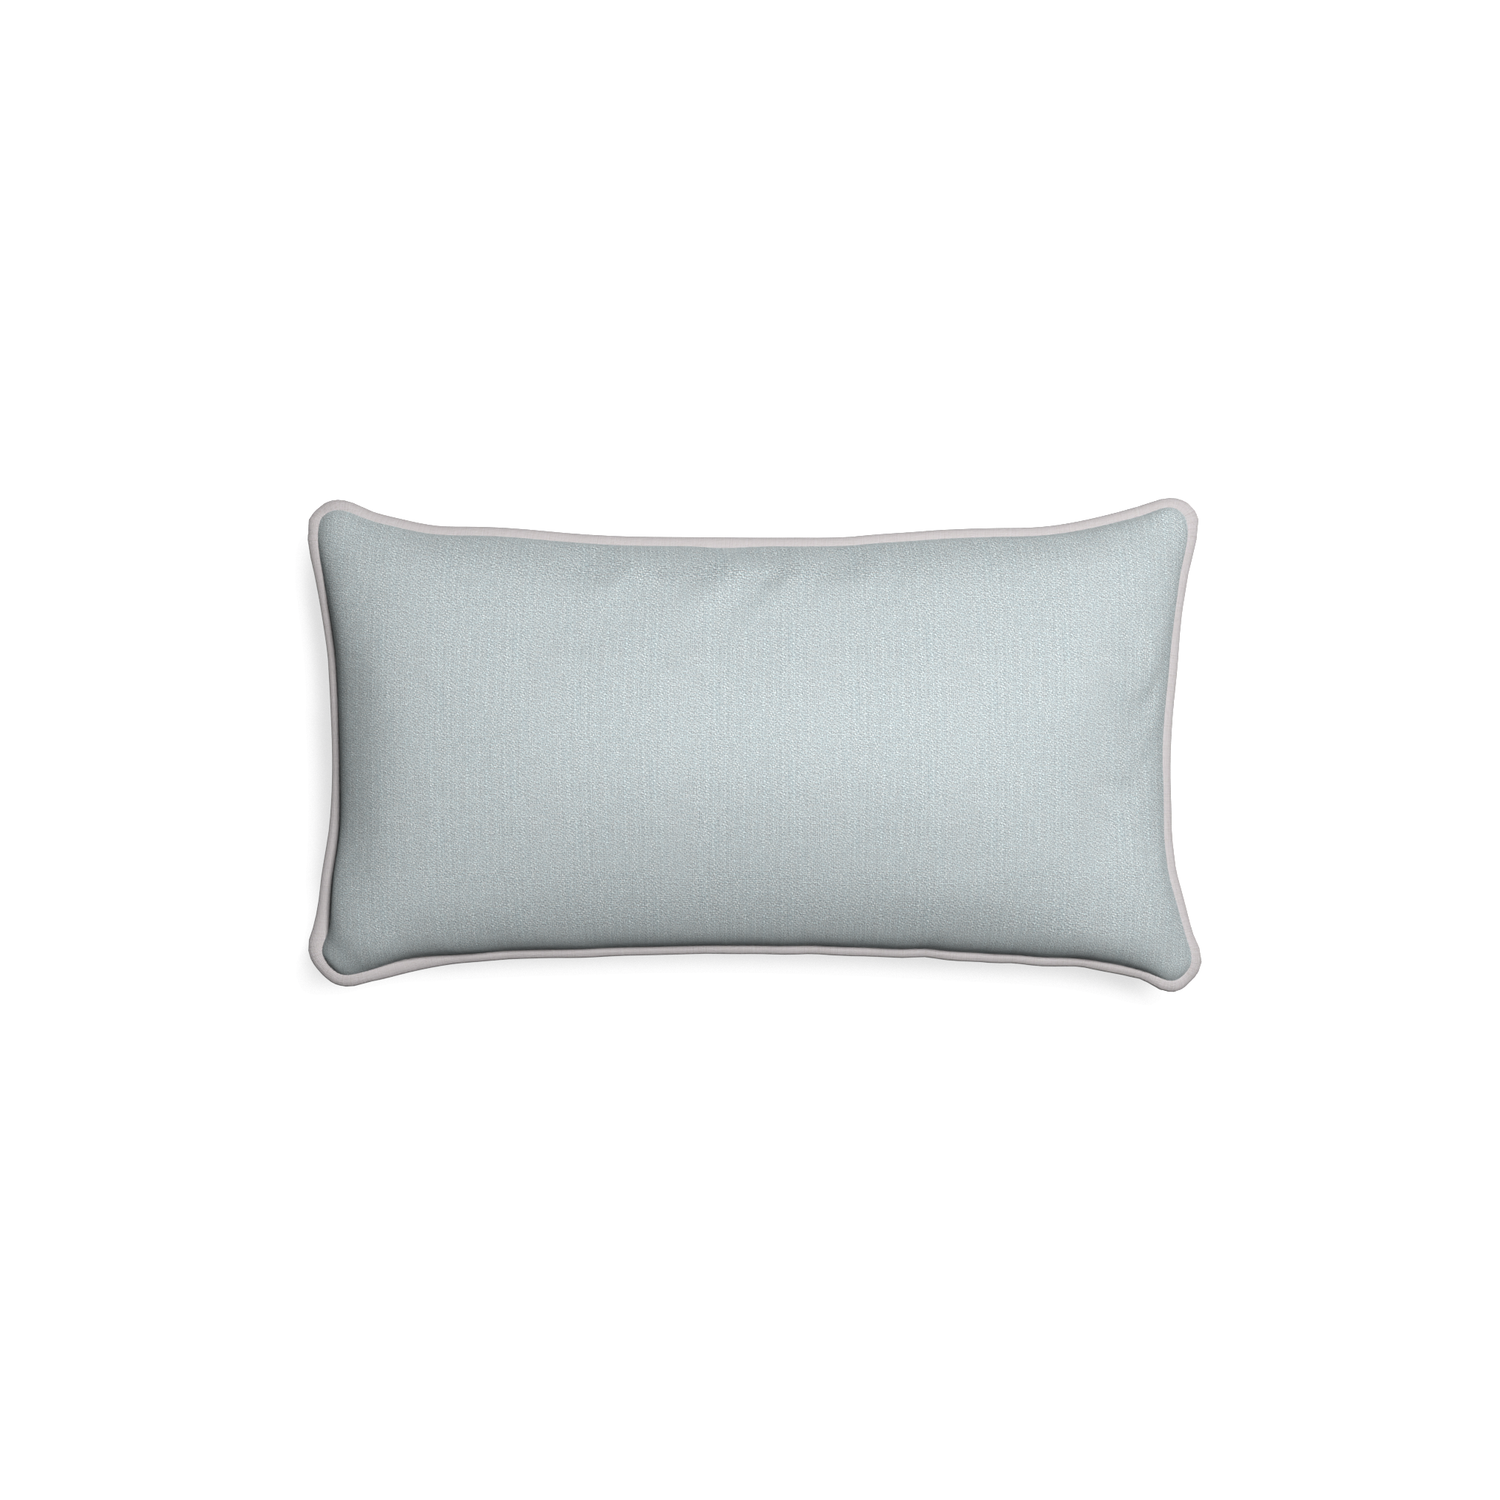 Petite-lumbar sea custom grey bluepillow with pebble piping on white background